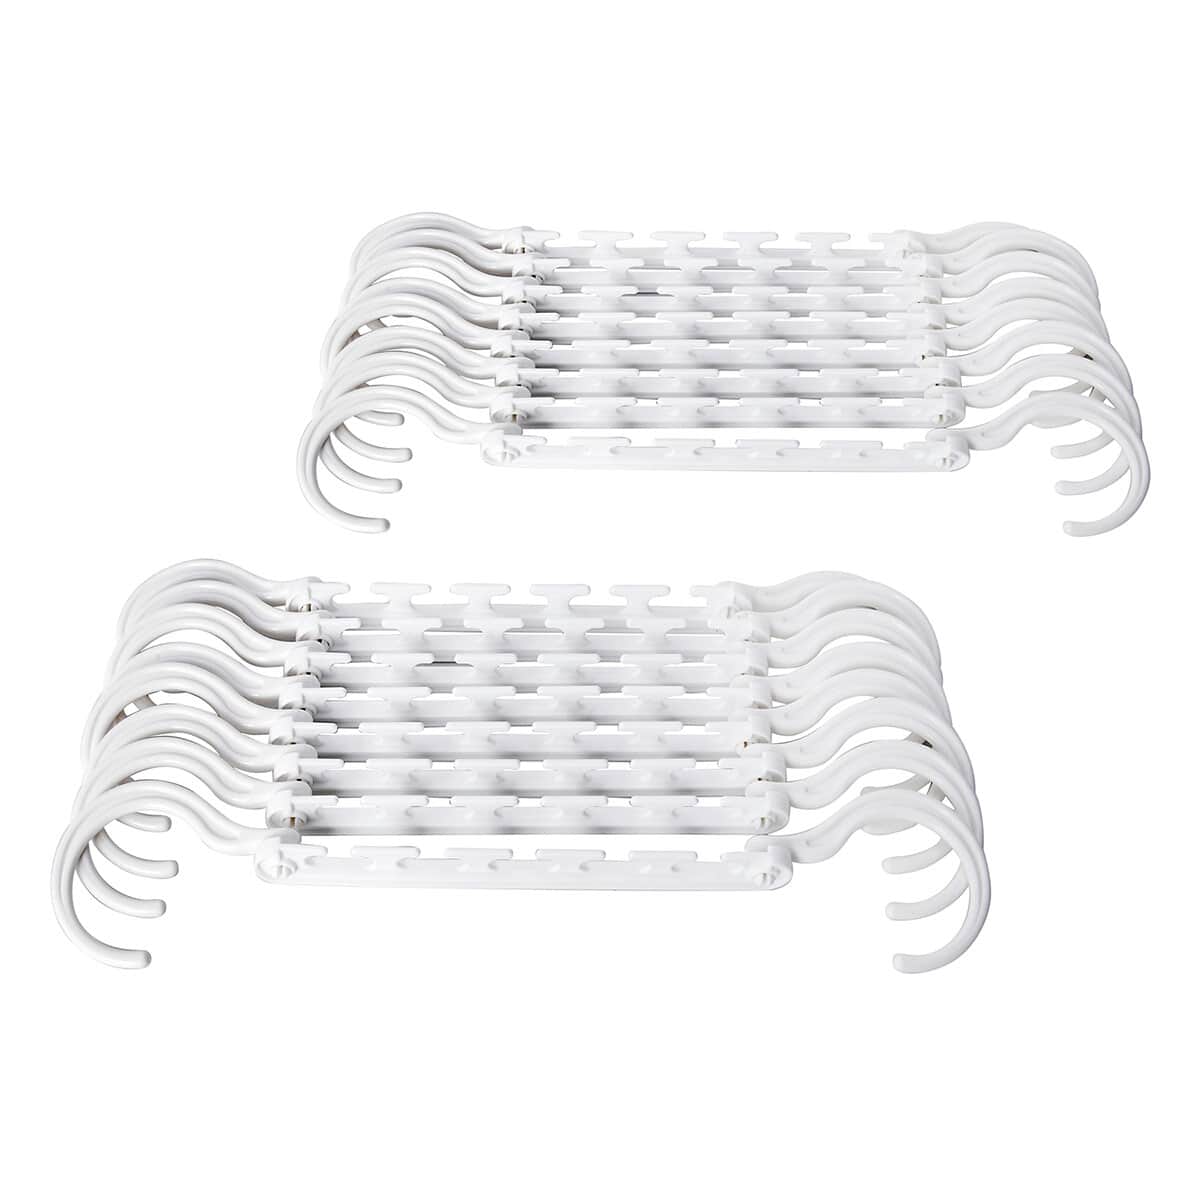 Set of 8 Space Saving Hangers -White (Holds up to 30 lbs) image number 0